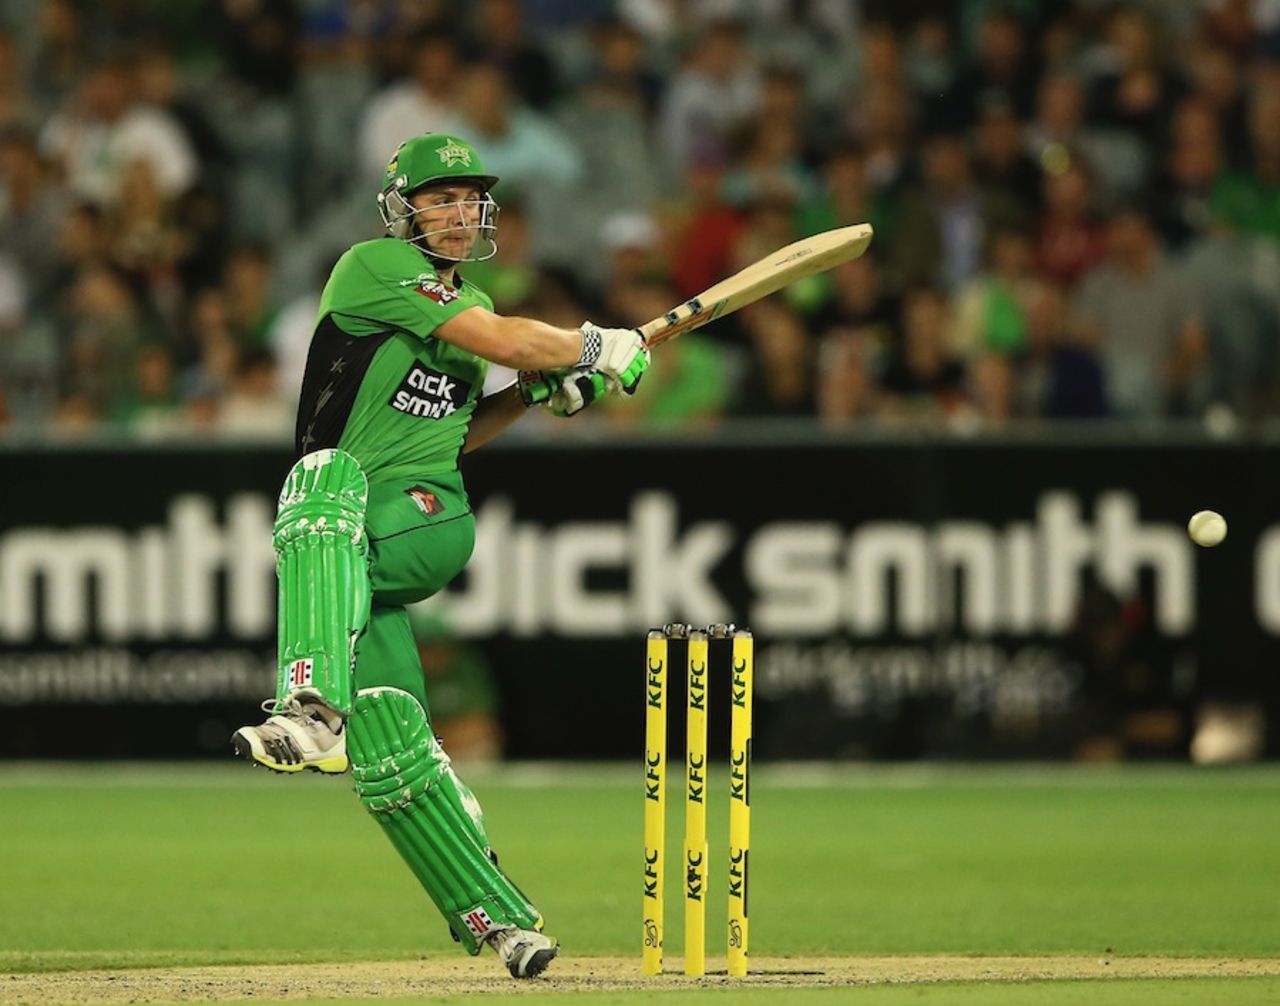 Luke Wright pulls during his fifty, Melbourne Stars v Hobart Hurricanes, Big Bash League, Melbourne, January 21, 2014